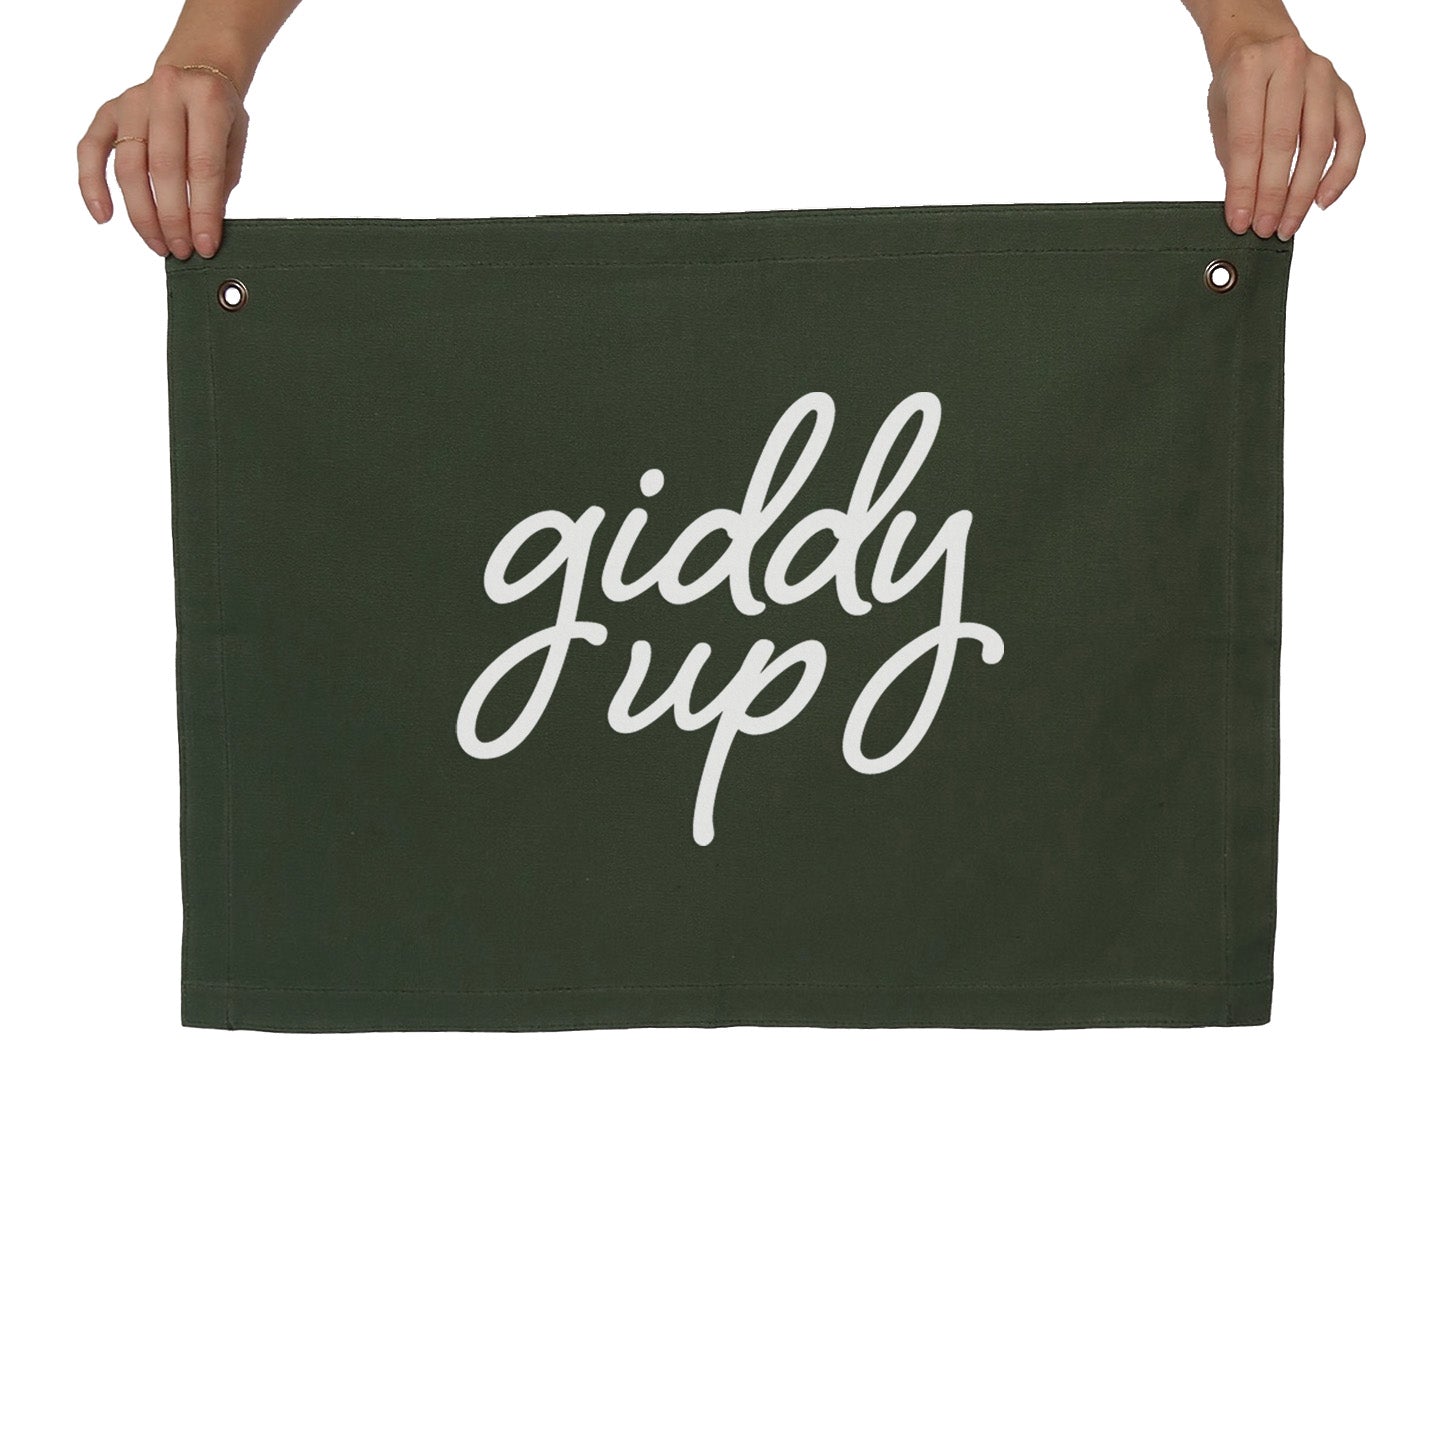 Giddy Up Large Canvas Flag